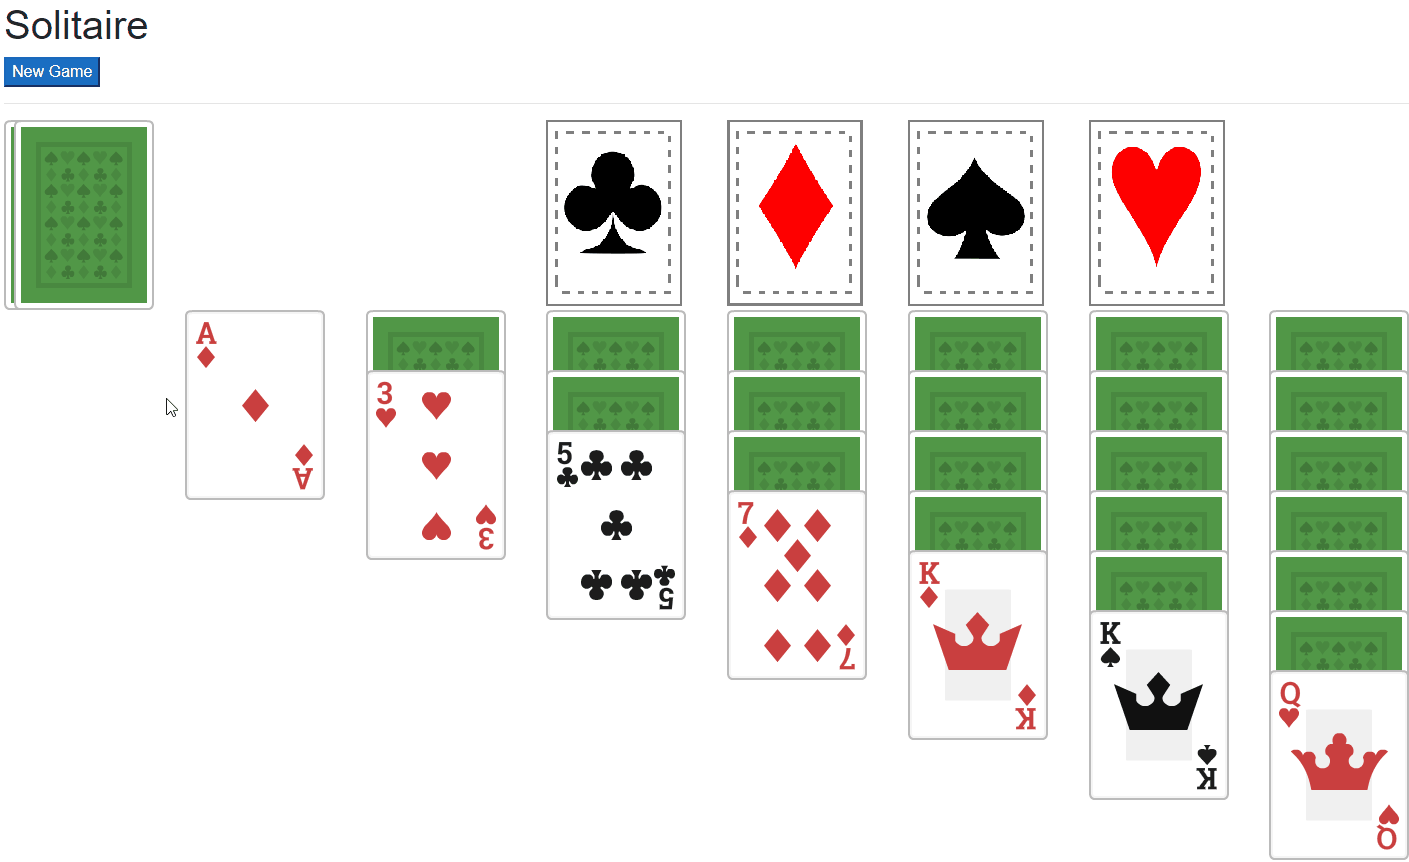 Solitaire in Blazor Part 5 - Double-Click Shortcut and Autocomplete